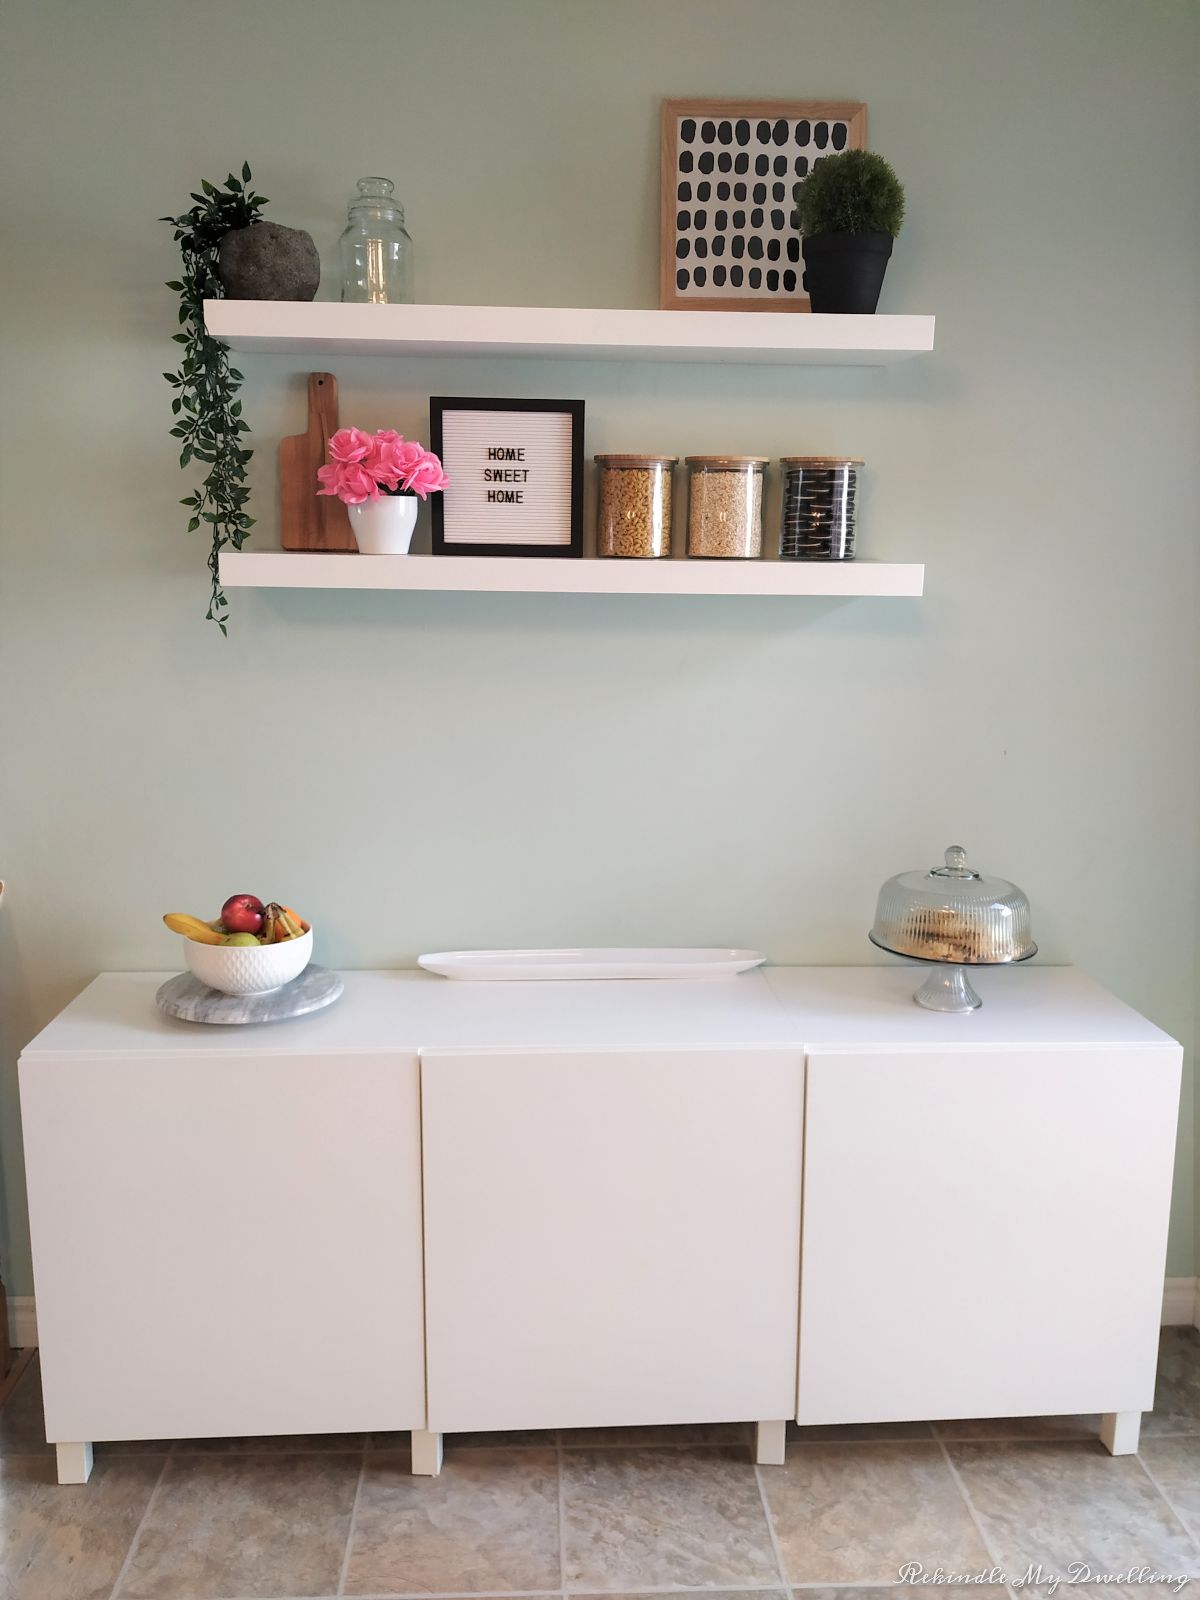 Finished storage makeover with sideboard, floating shelves and decor.